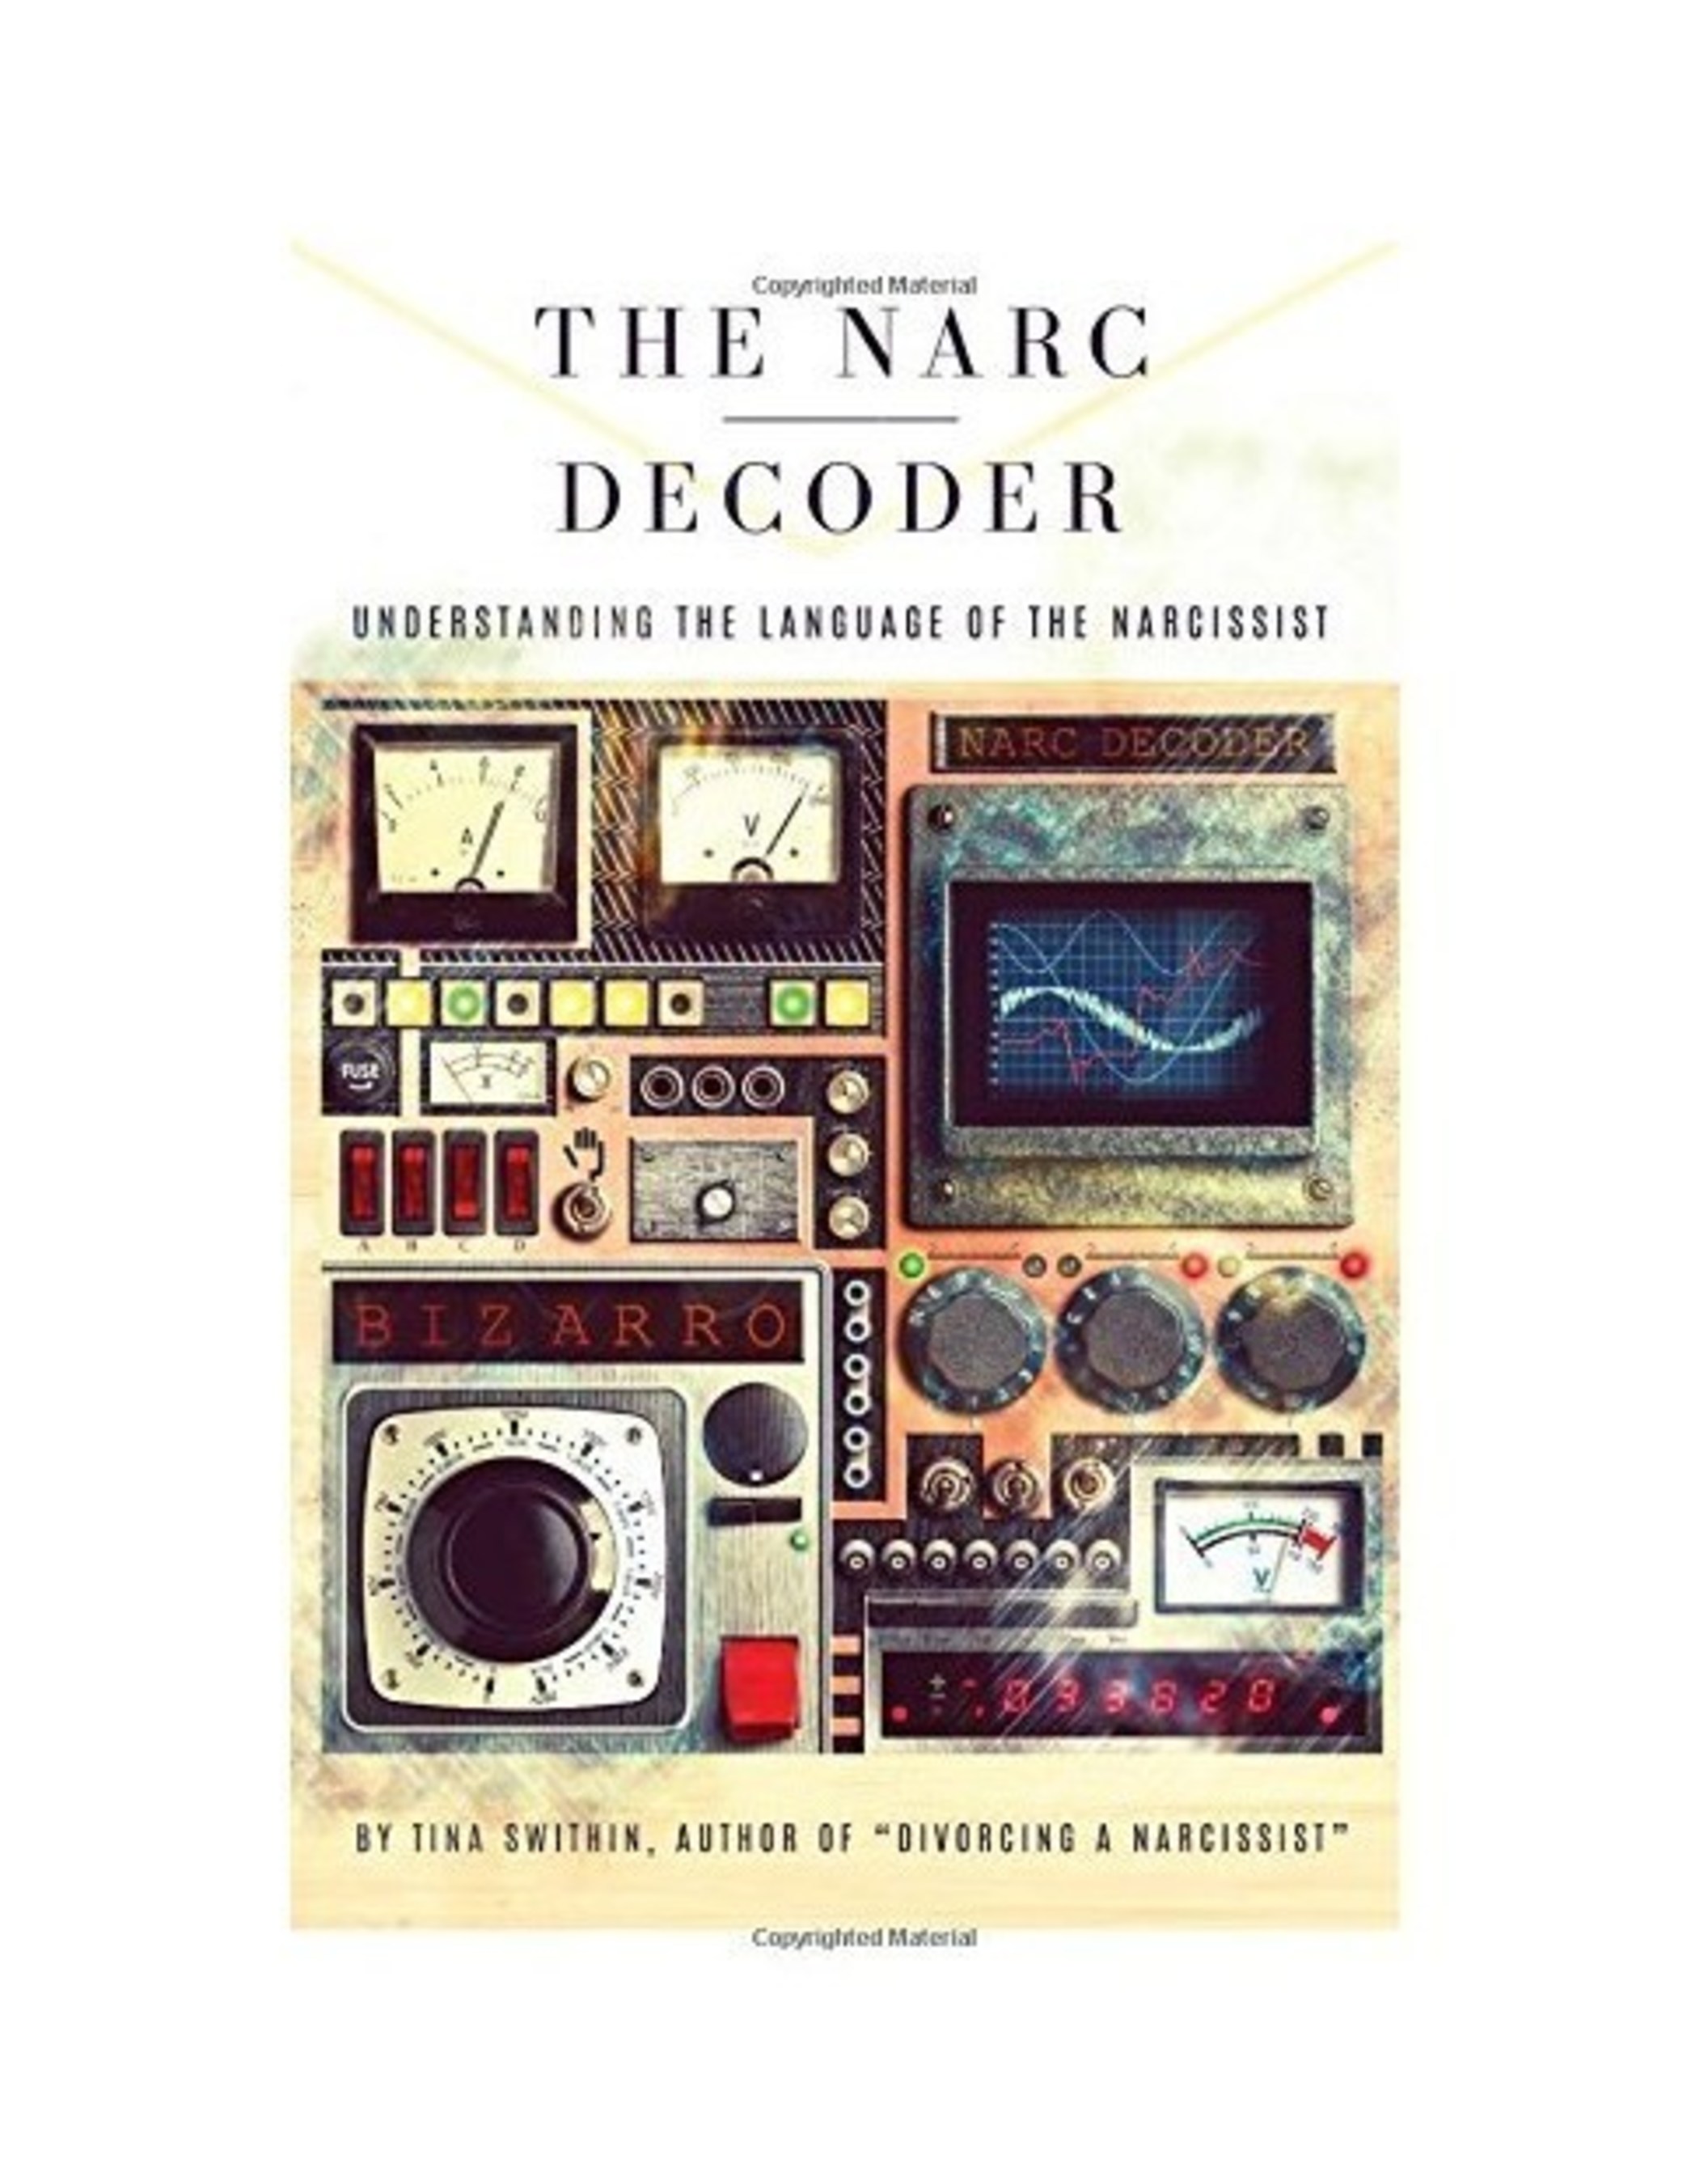 The Narc Decoder: Understanding the Language of the Narcissist